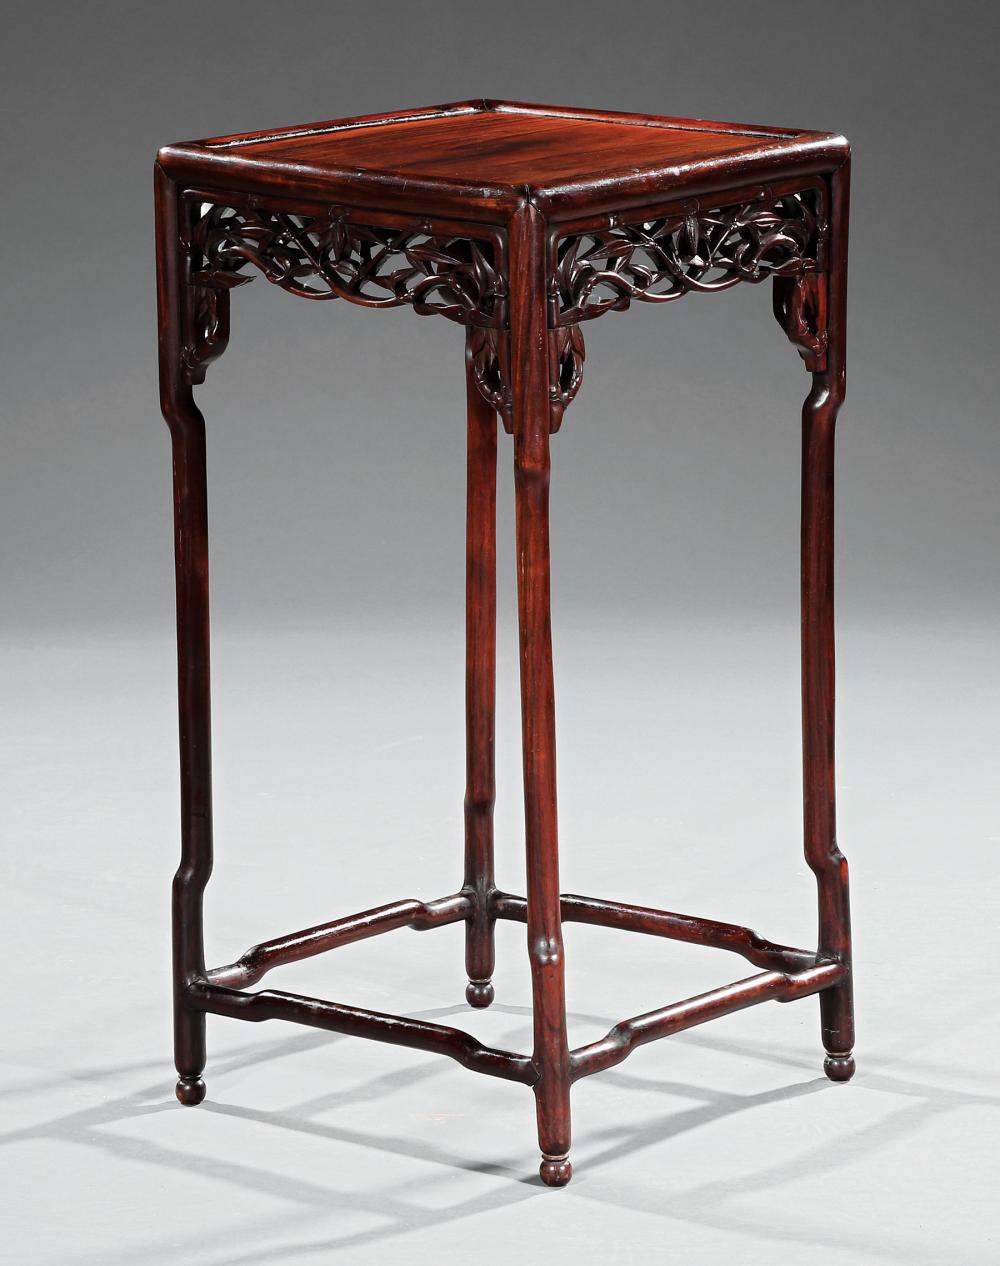 CHINESE CARVED HARDWOOD SIDE TABLEChinese